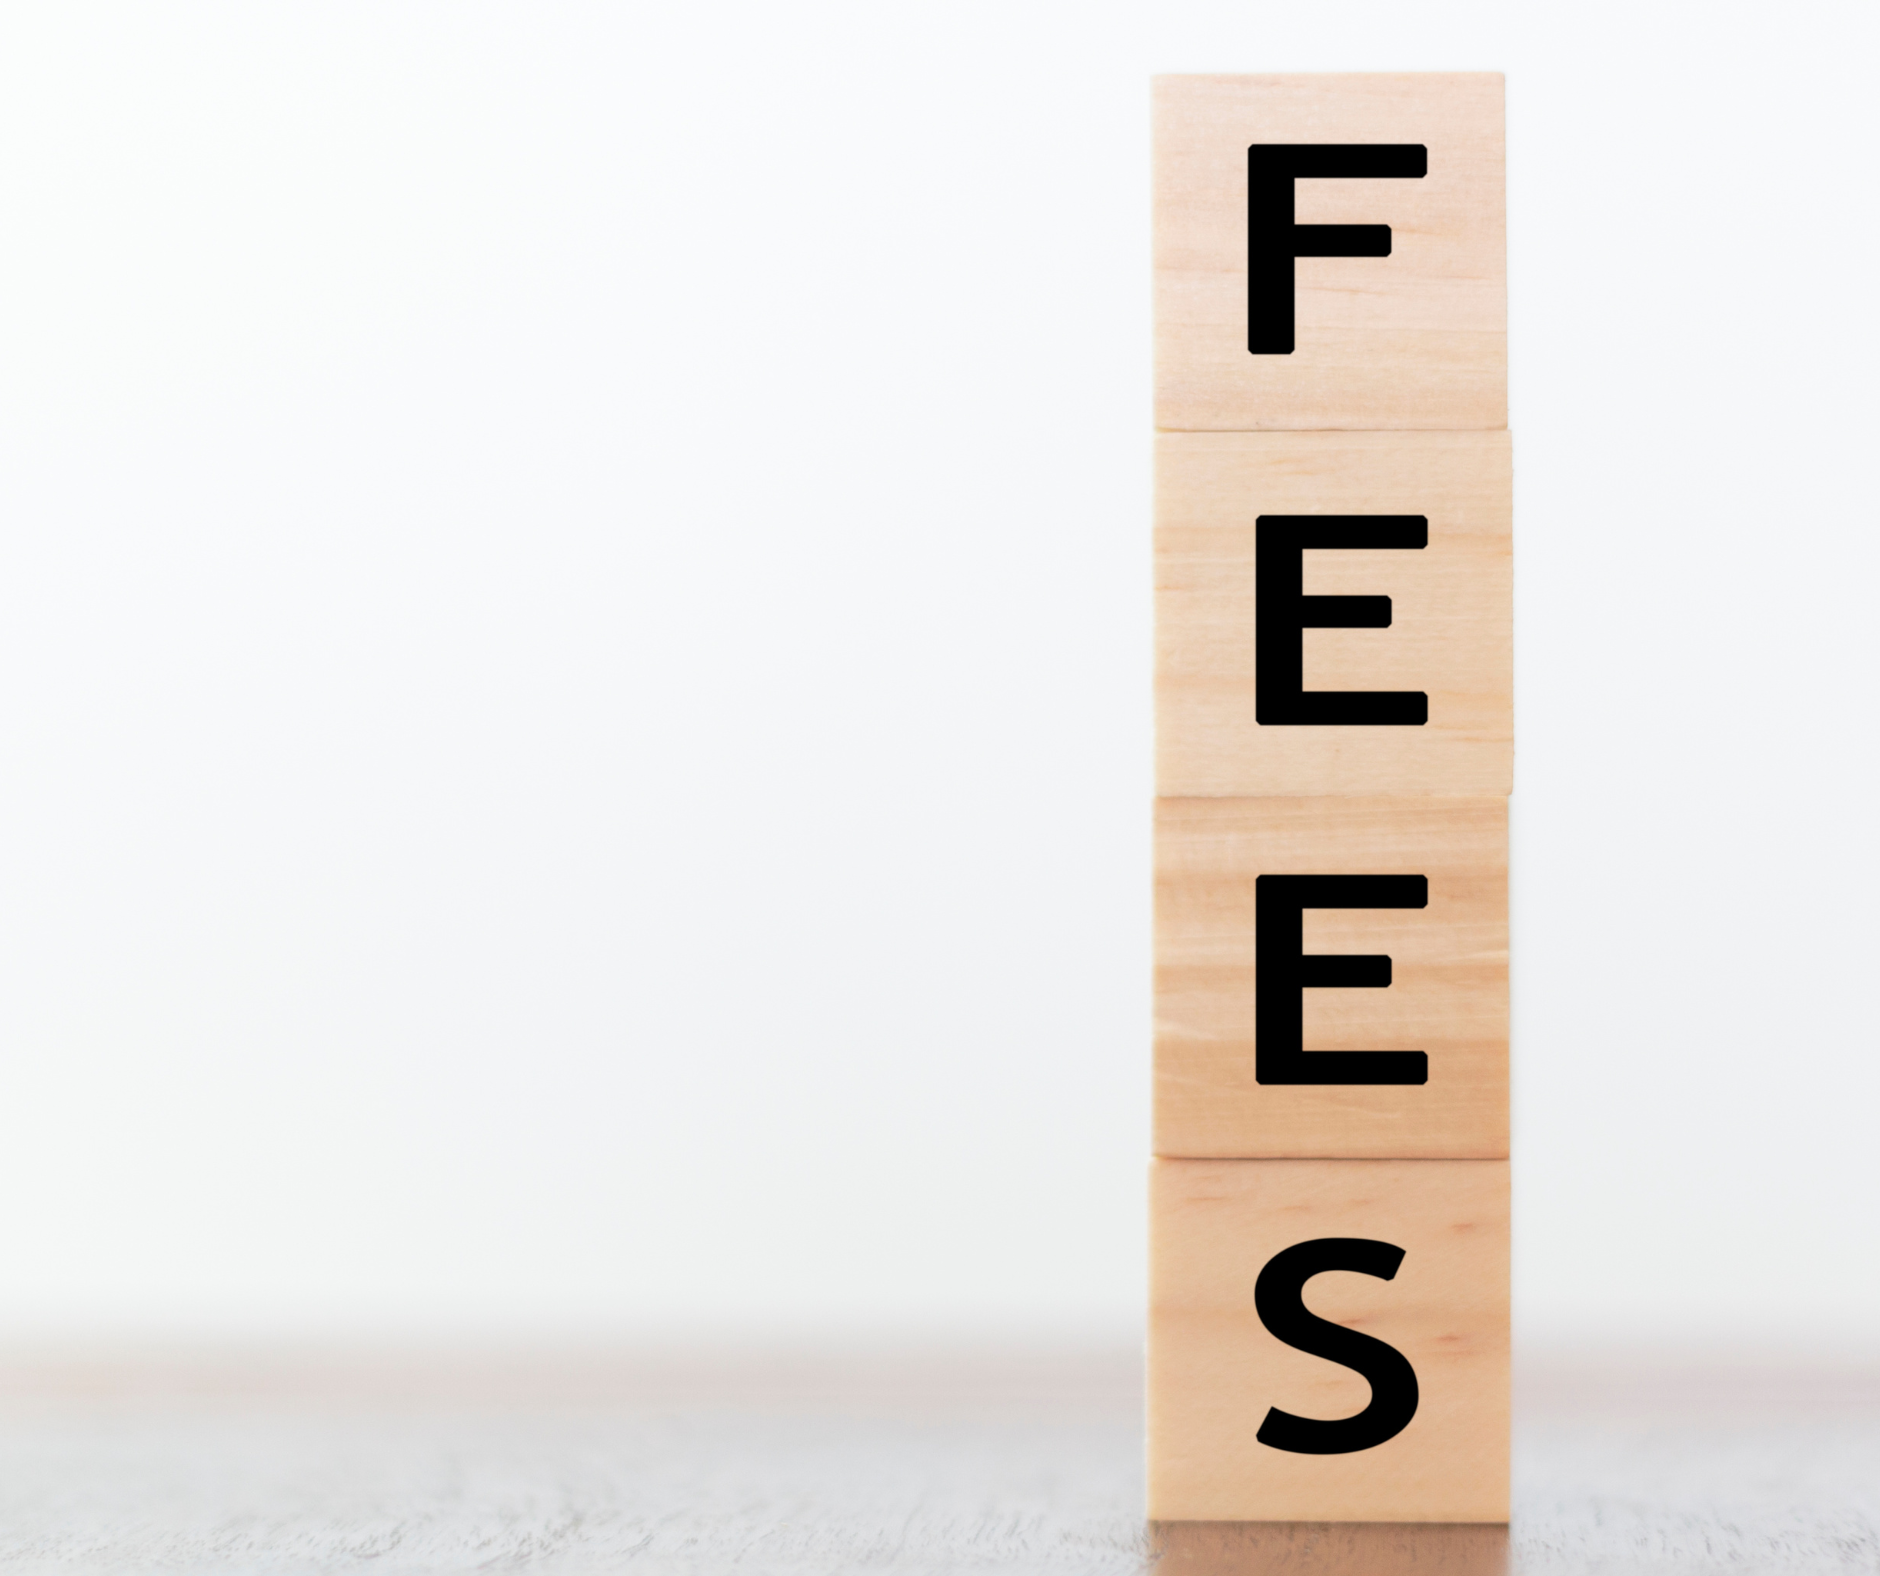 Professional Fees Series: Commentary on the 2015 Guideline Tariff of Professional Fees for Quantity Surveyors